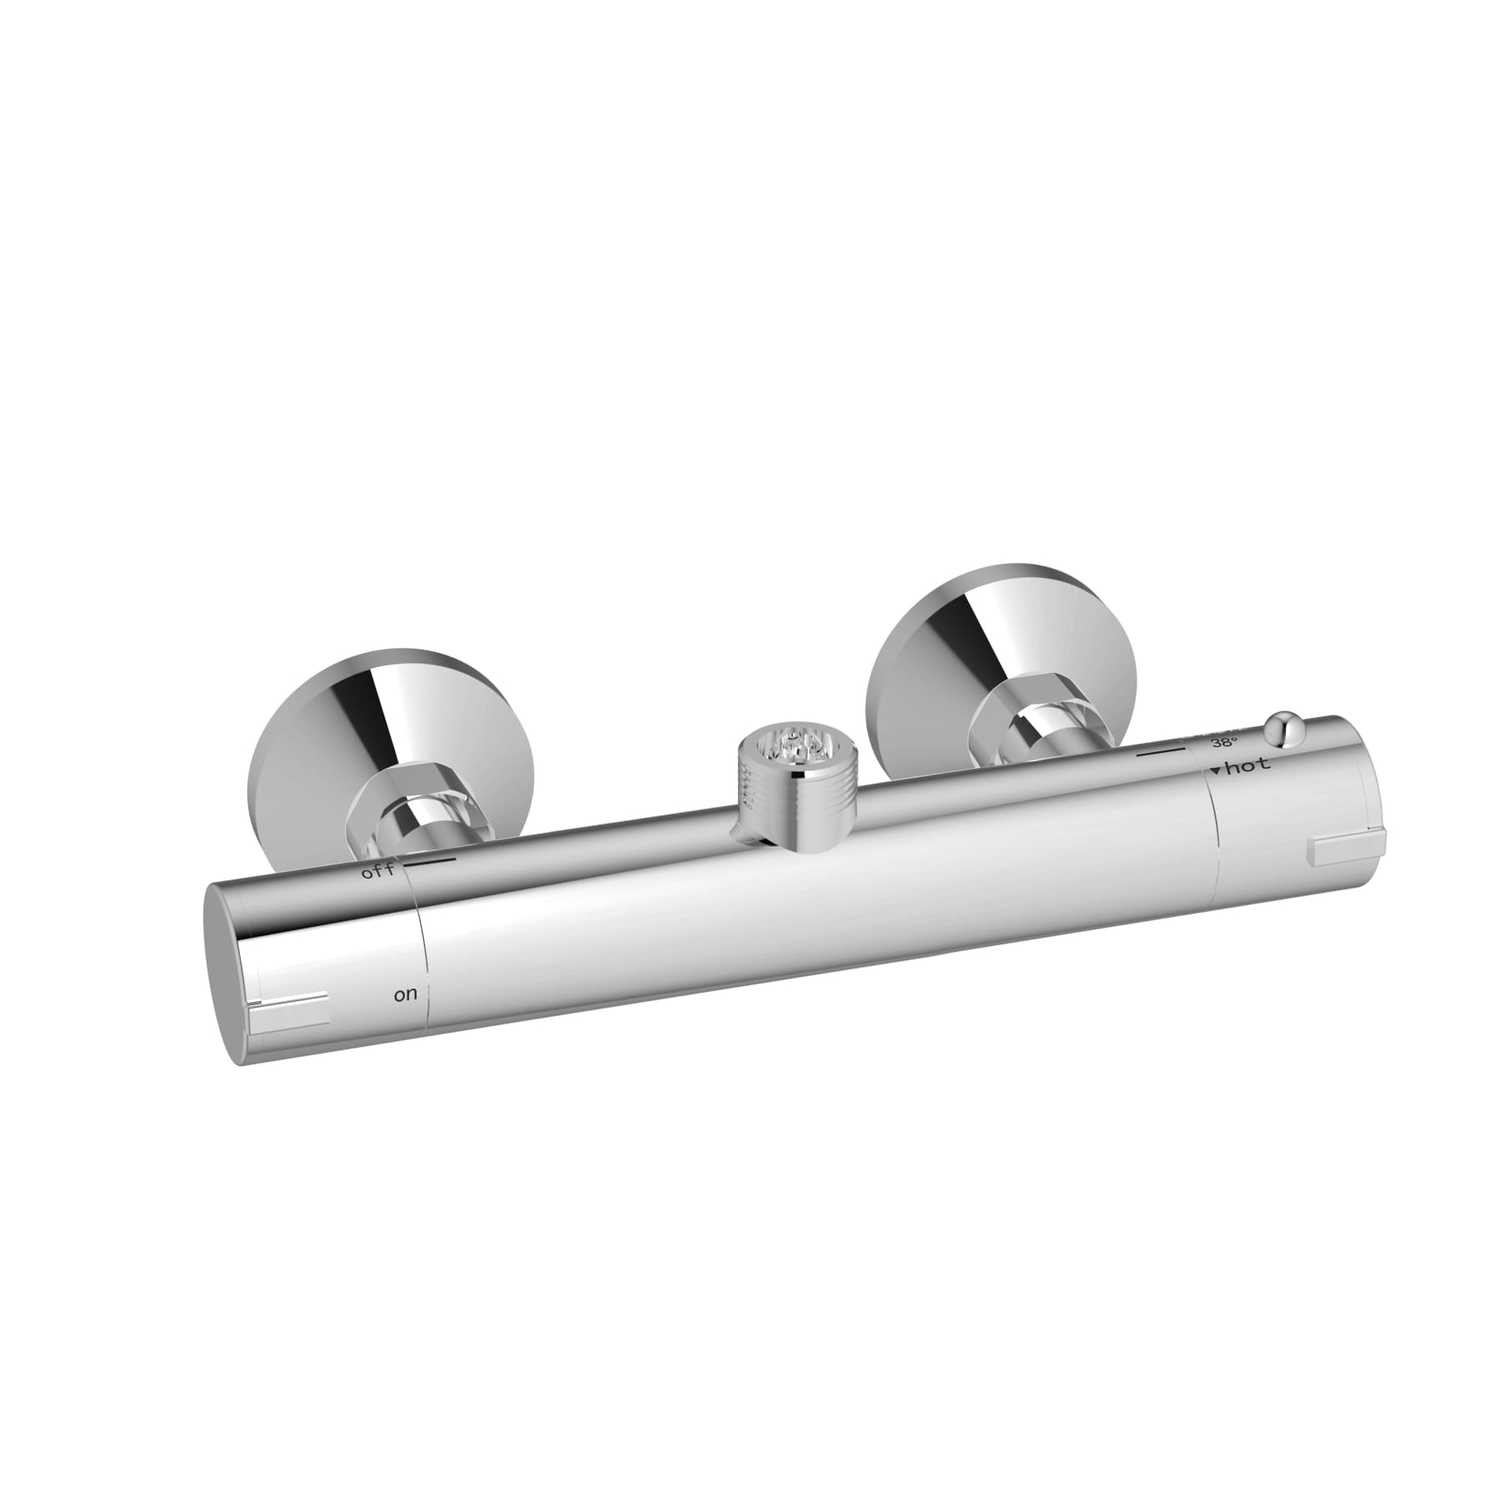 Flow thermostatic round bar shower valve - top outlet